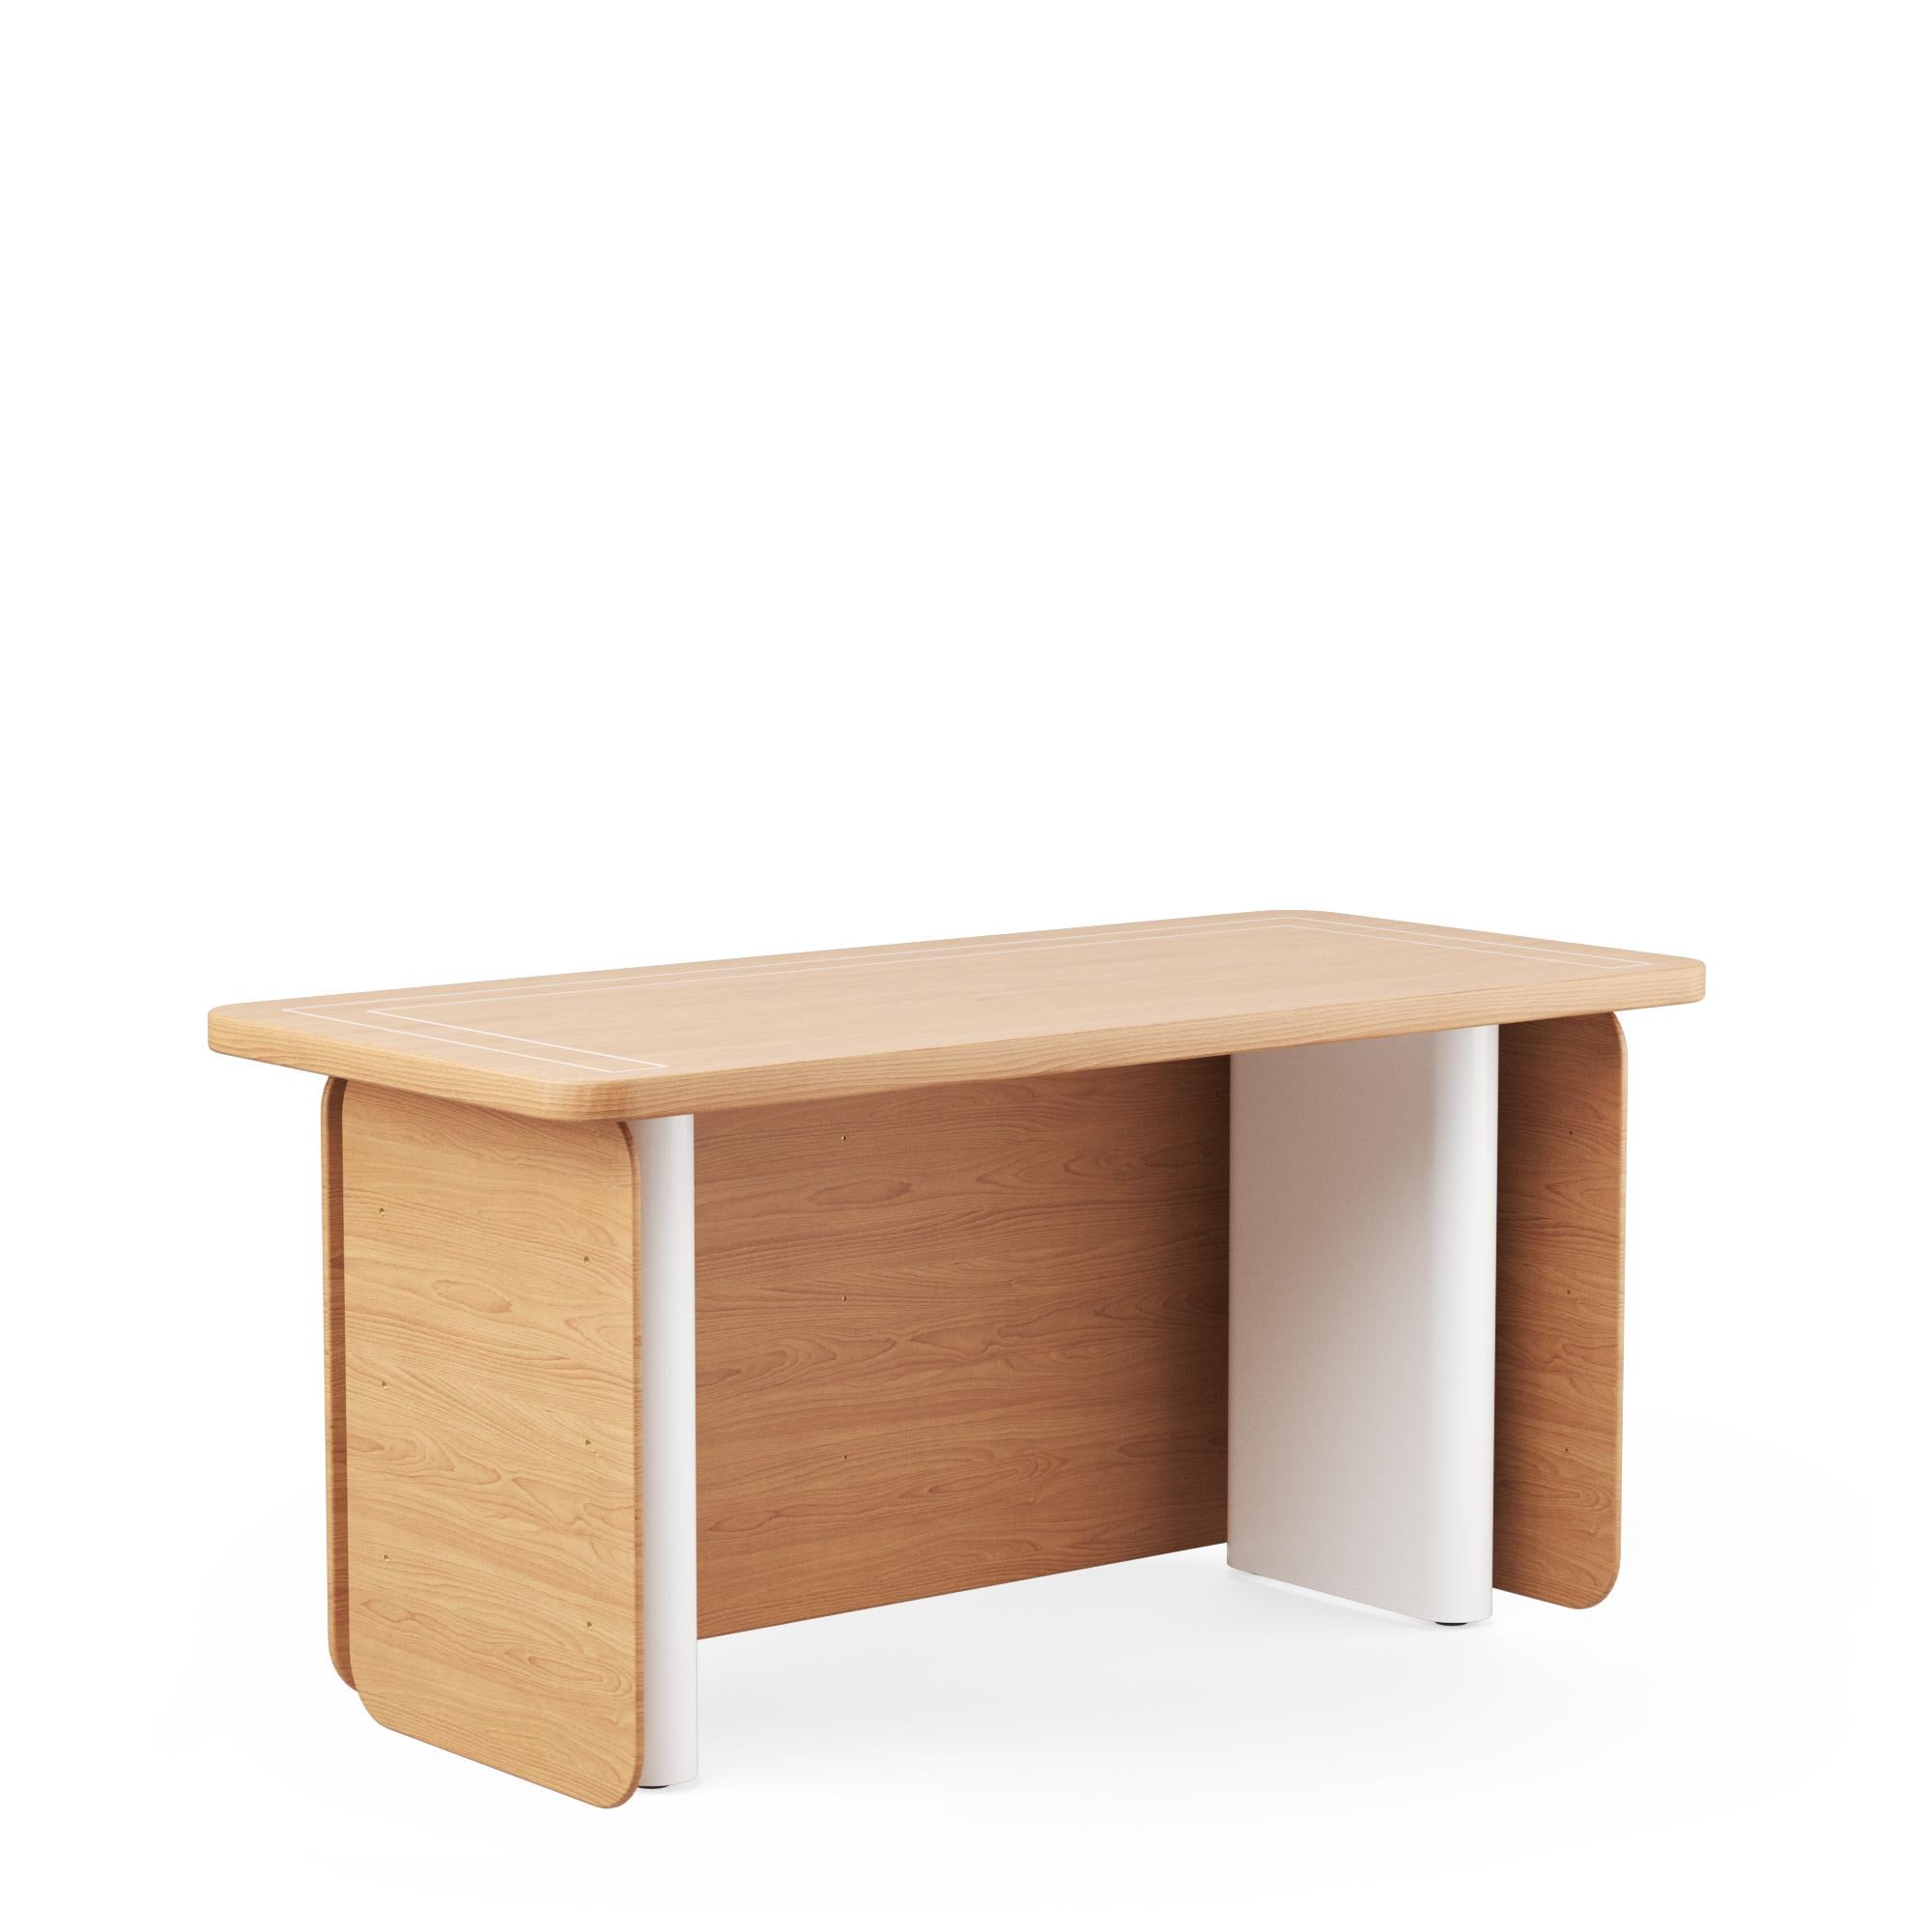 The HOS Desk, standing for Home Office System, epitomizes adaptability and modern design. Featuring three mountable and dismountable wooden panels, each with three detachable solid wood shelves, it caters to the evolving needs of the user. The